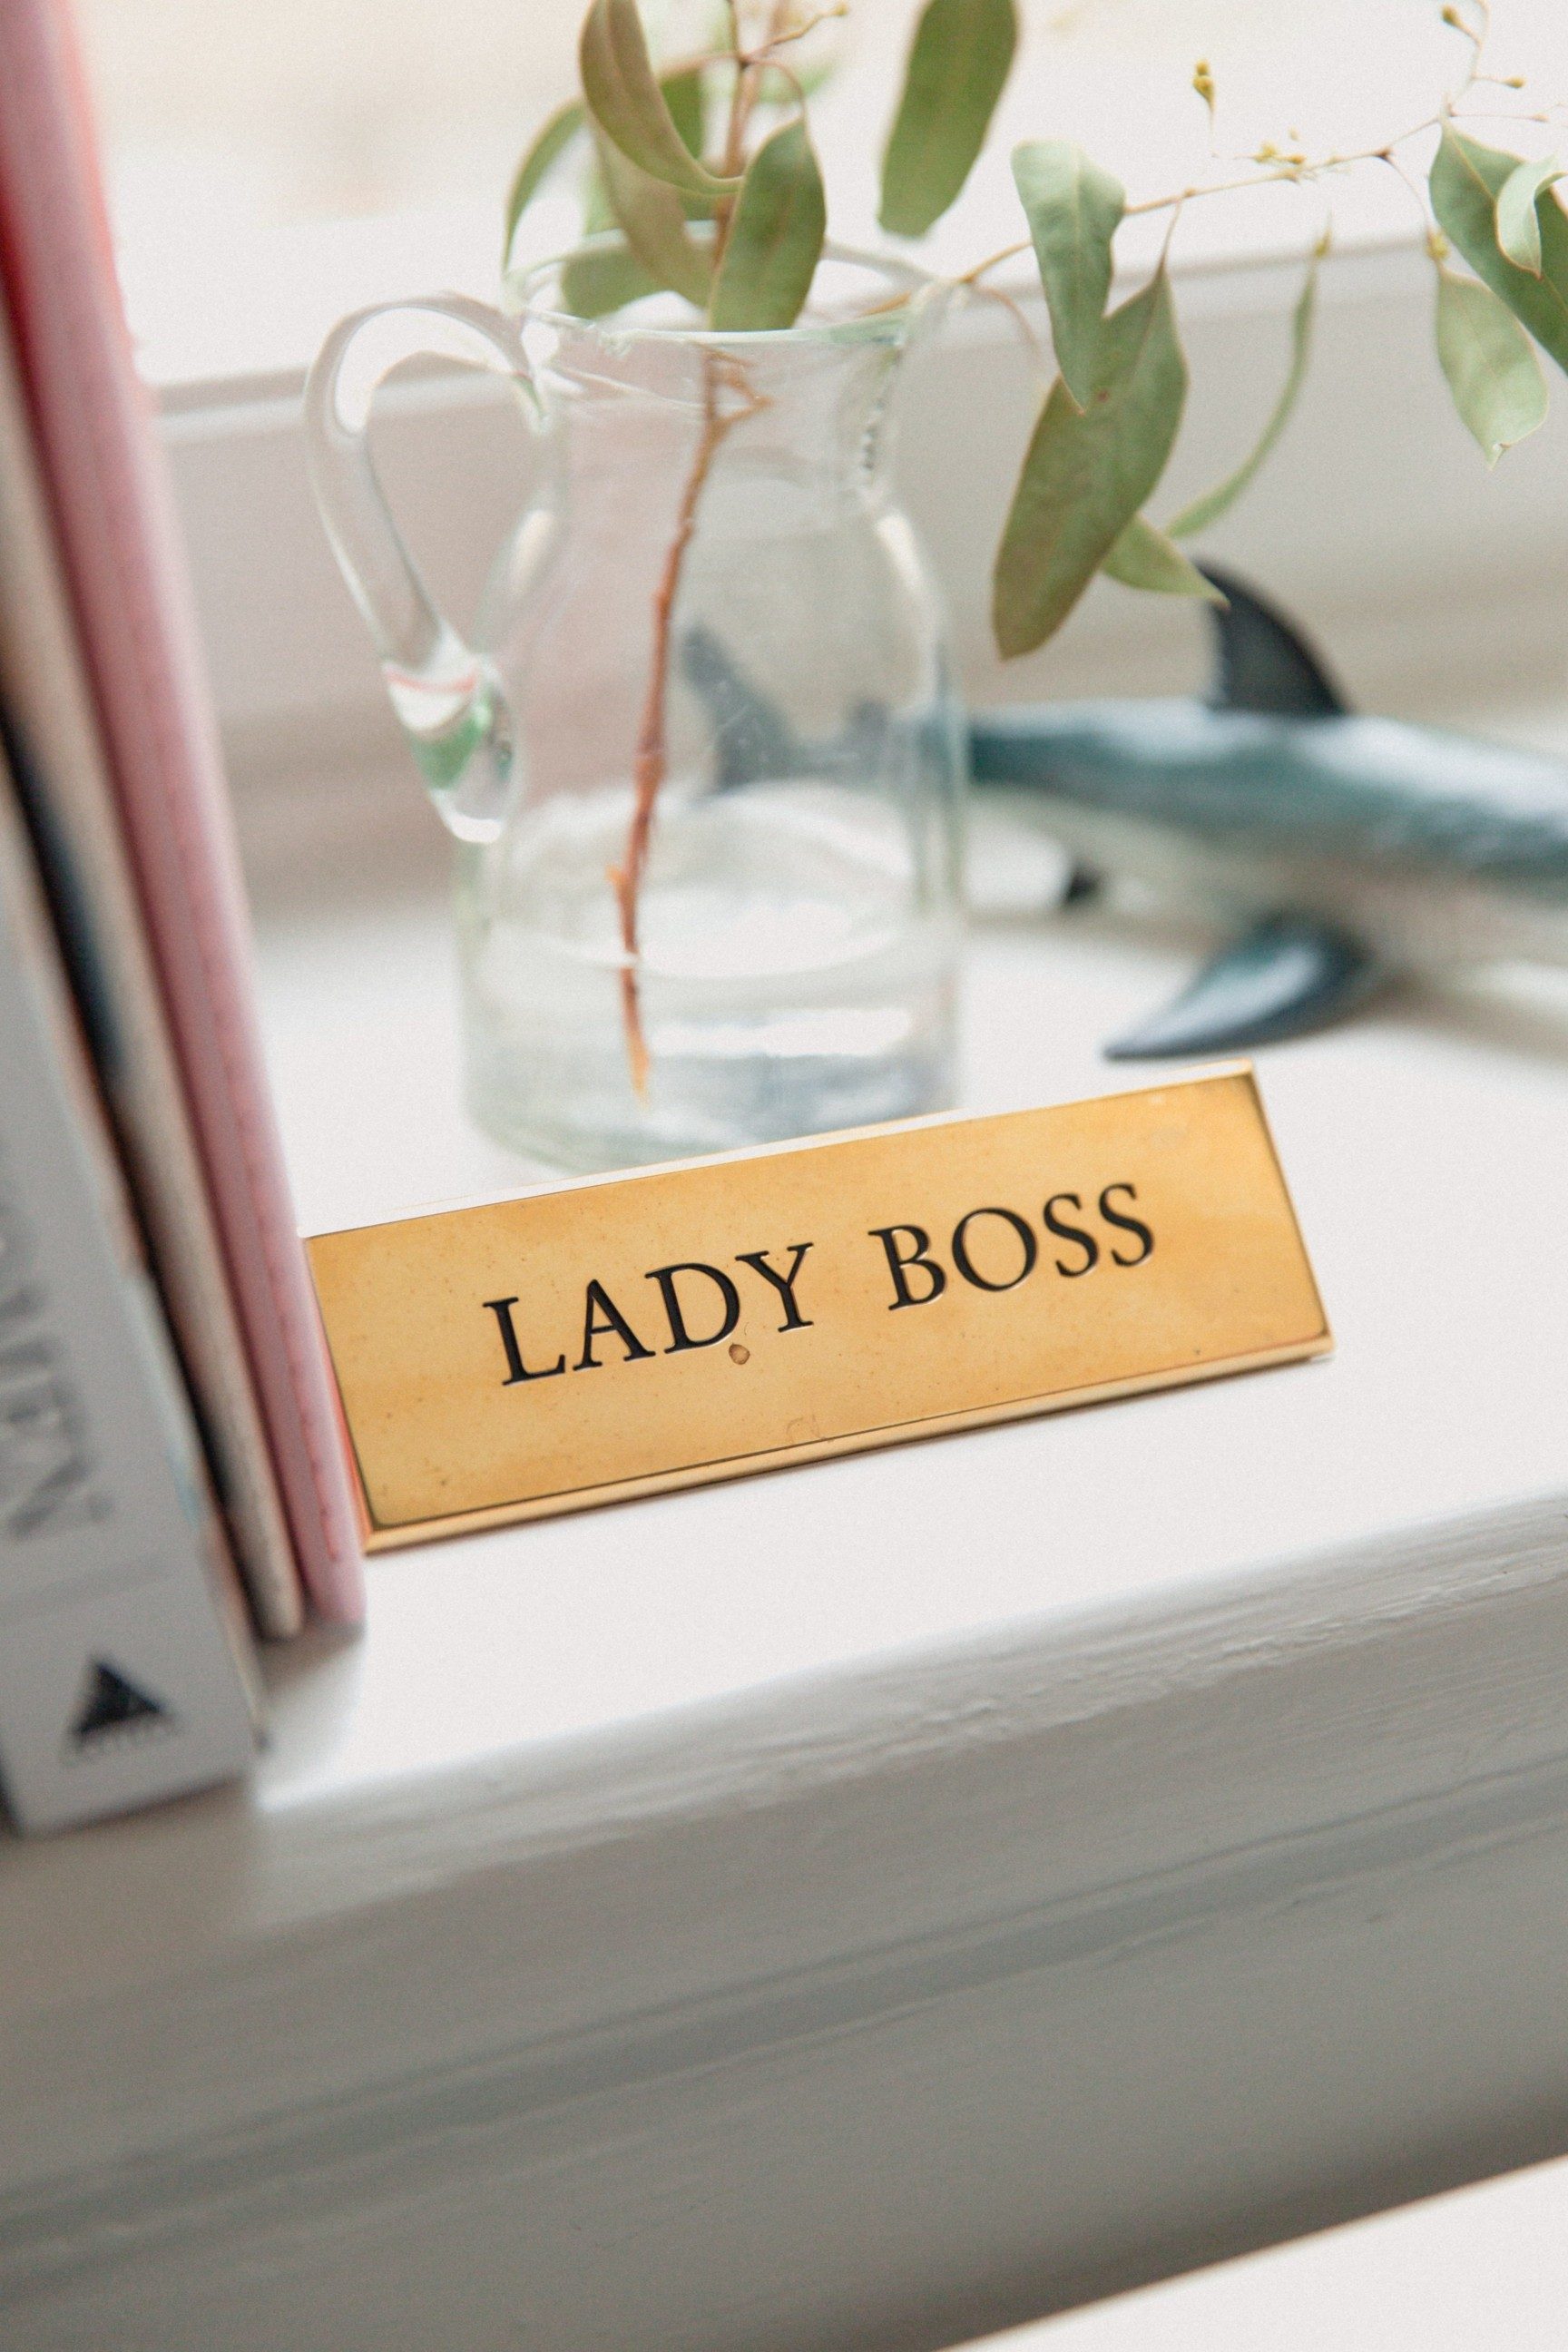 Giving lady bosses a helping hand